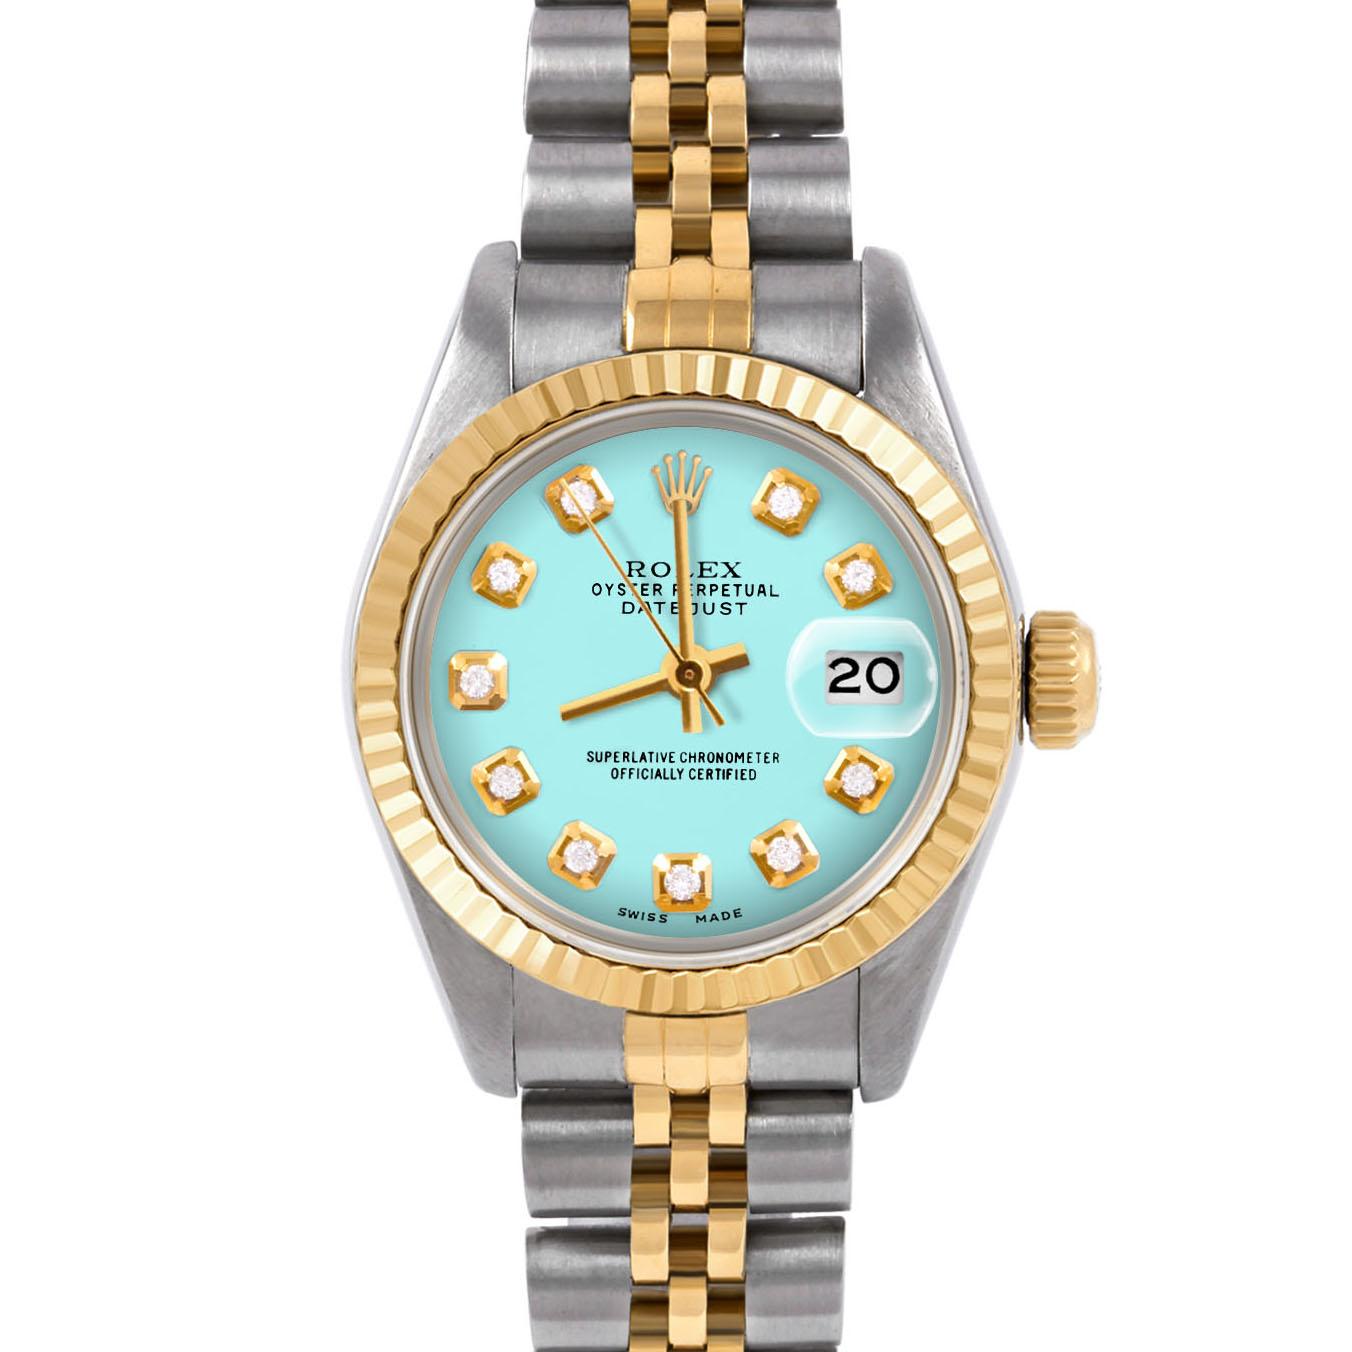 Swiss Wrist - SKU 6917-TT-TRQ-DIA-AM-FLT-JBL

Brand : Rolex
Model : Datejust (Non-Quickset Model)
Gender : Ladies
Metals : 14K/Stainless Steel
Case Size : 26 mm

Dial : Custom Turquoise Diamond Dial (This dial is not original Rolex And has been